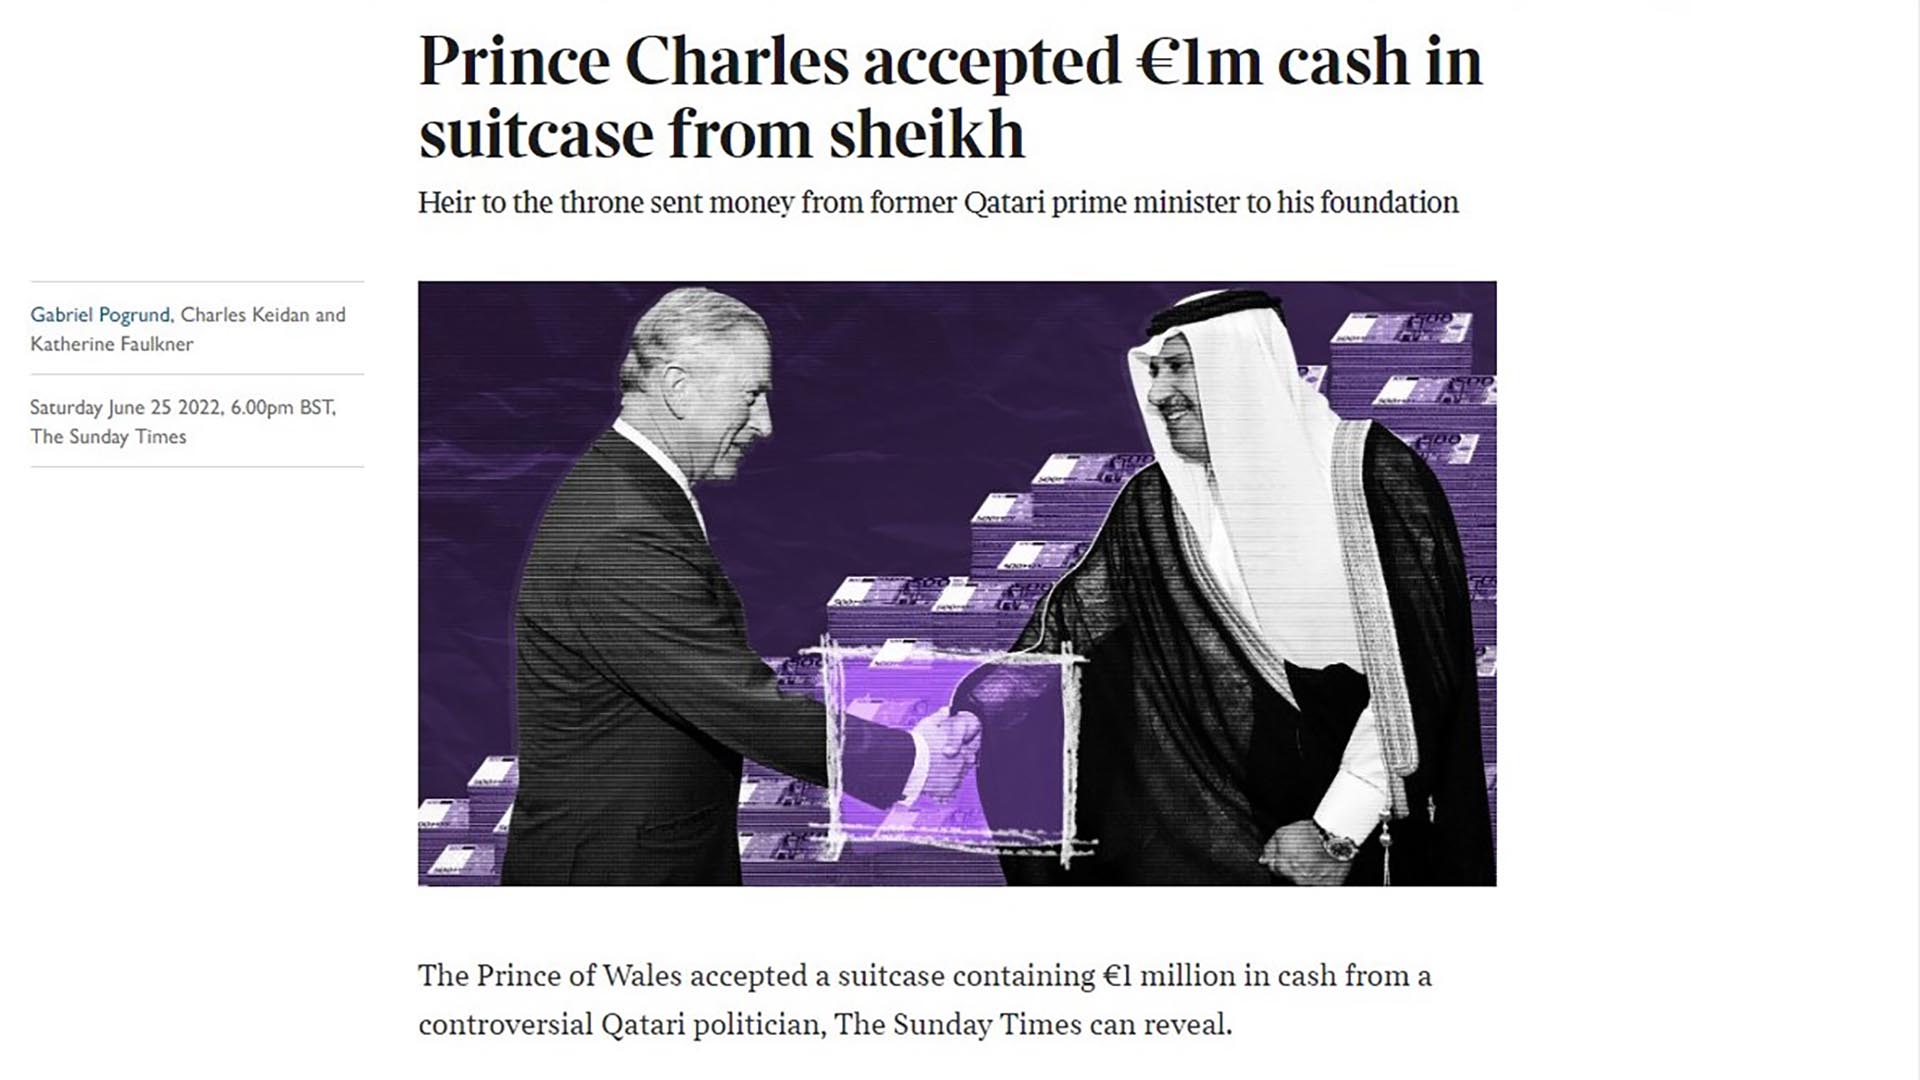 The Sunday Times published the payments received by Prince Charles